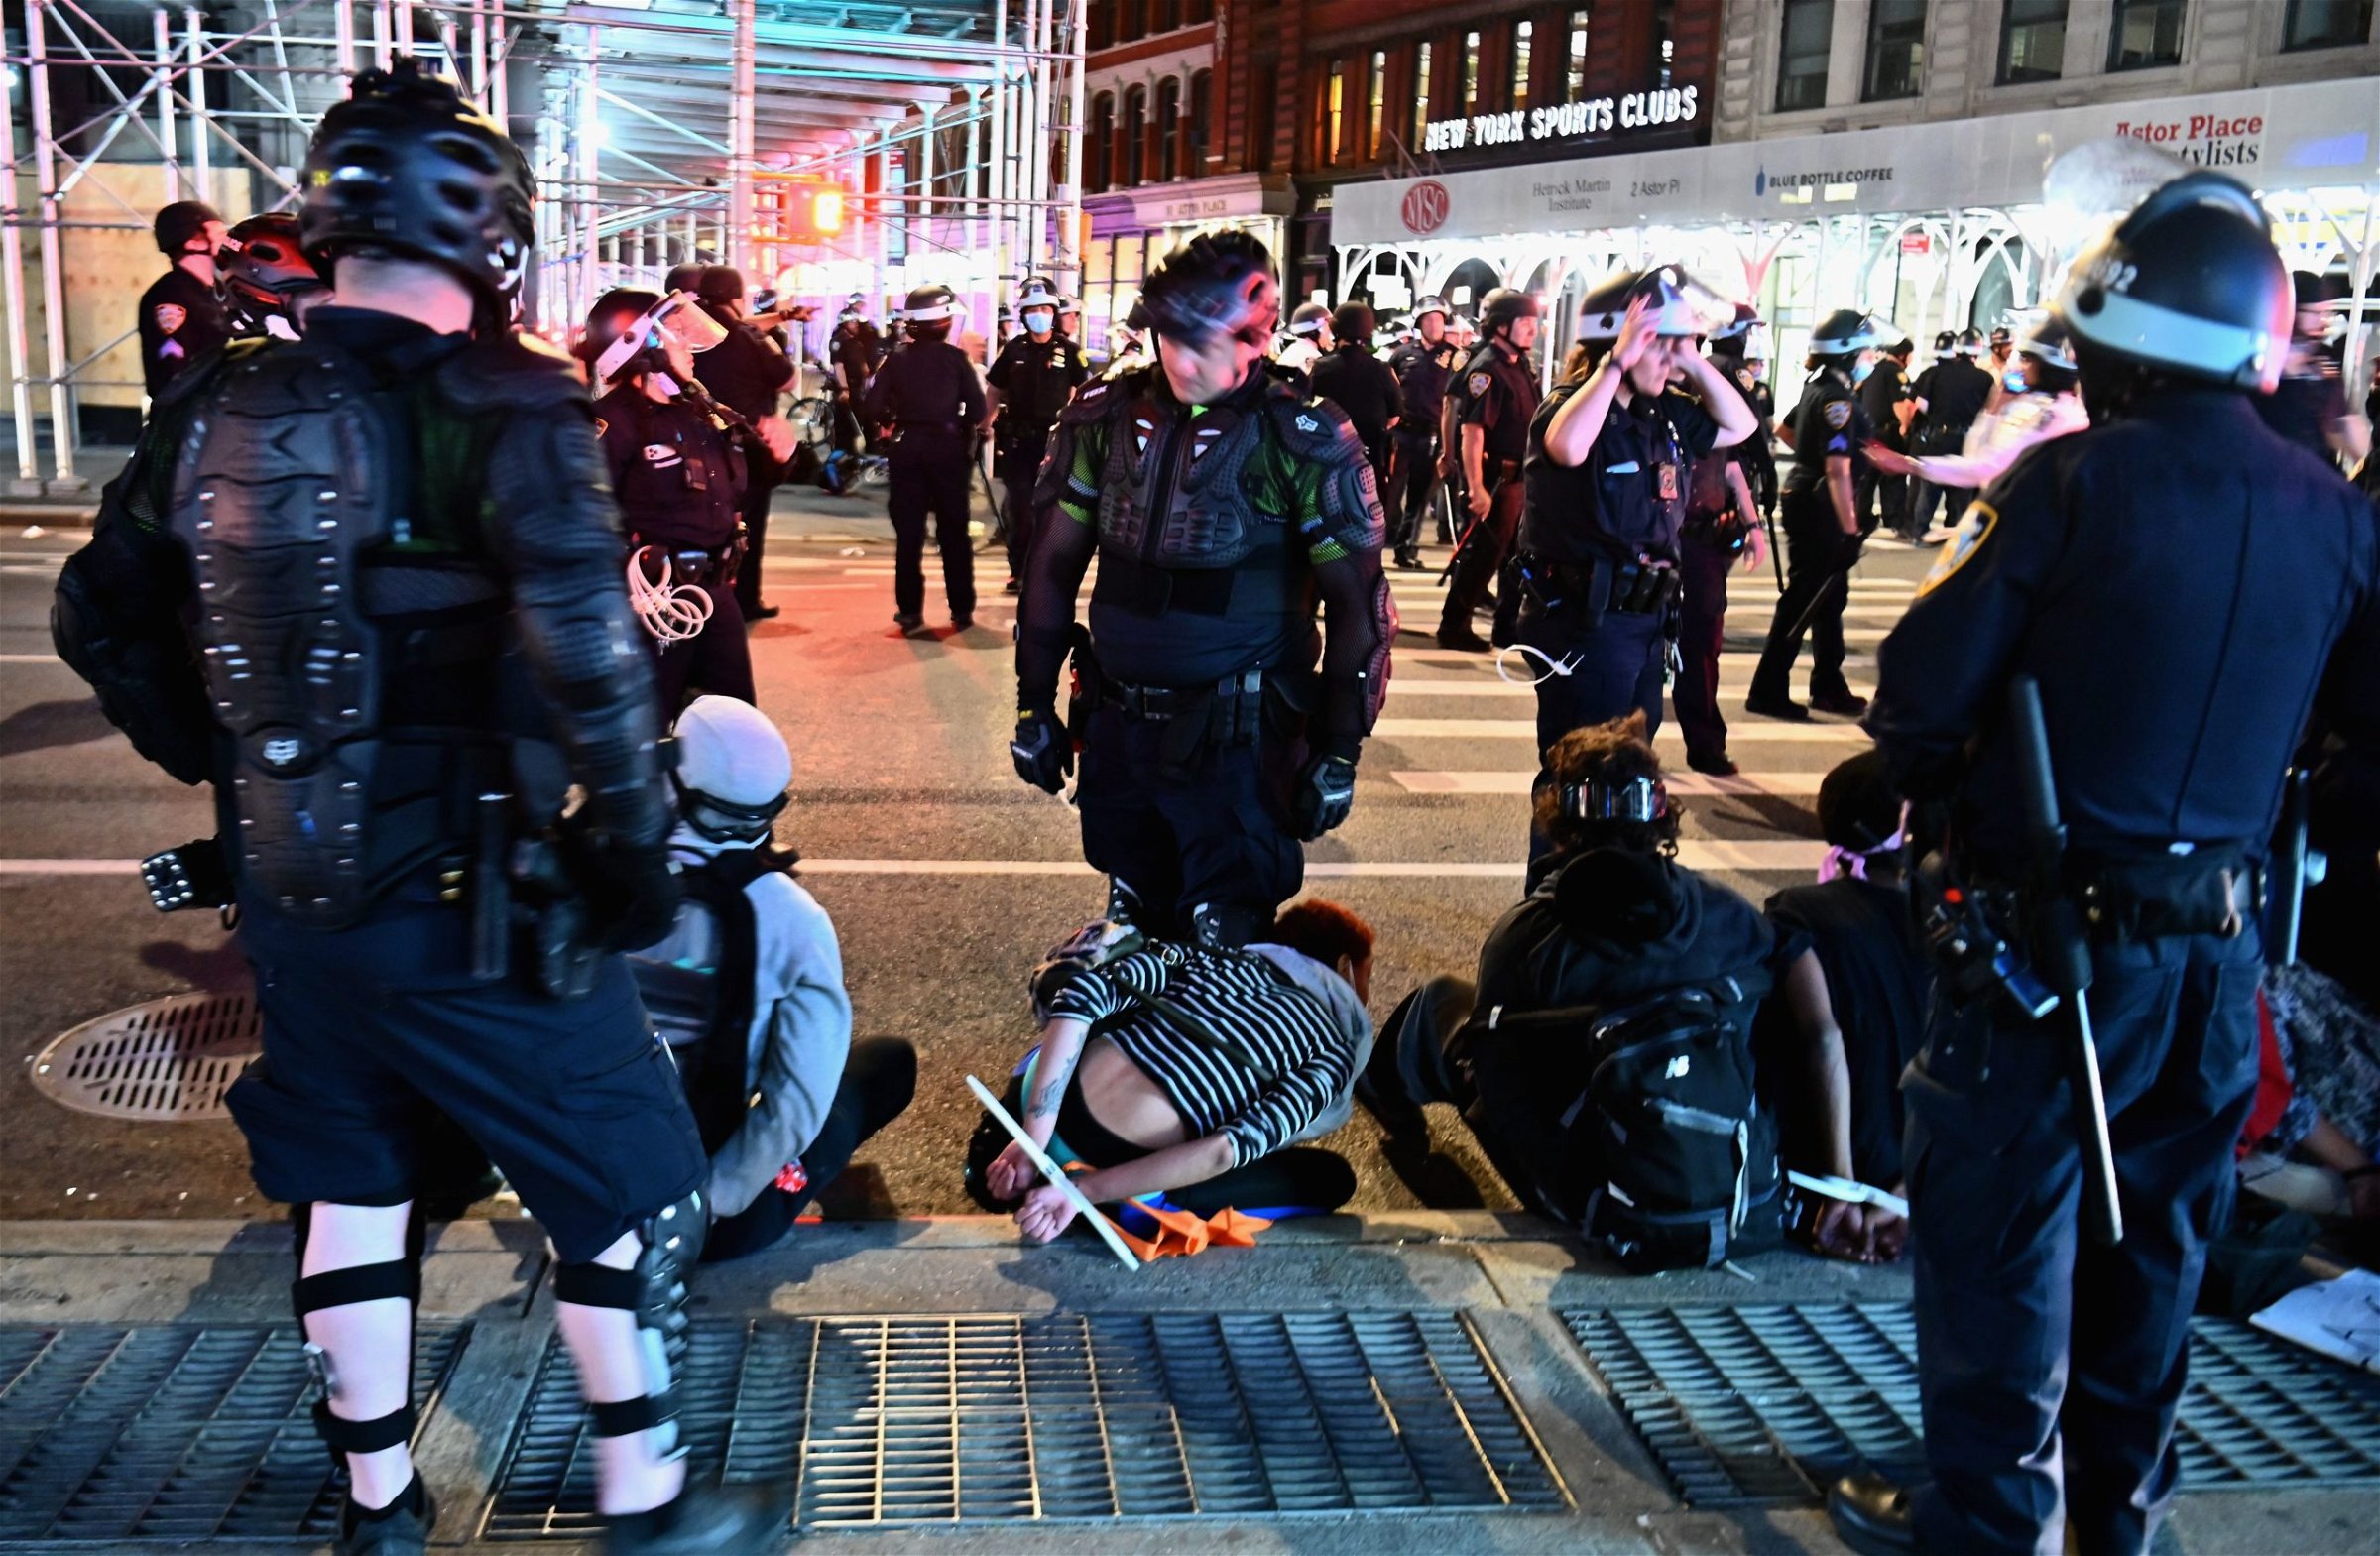 People are arrested after looting on June 2, 2020 in New York City. - Anti-racism protests have put several US cities under curfew to suppress rioting, following the death of George Floyd while in police custody. (ANGELA WEISS/AFP via Getty Images)